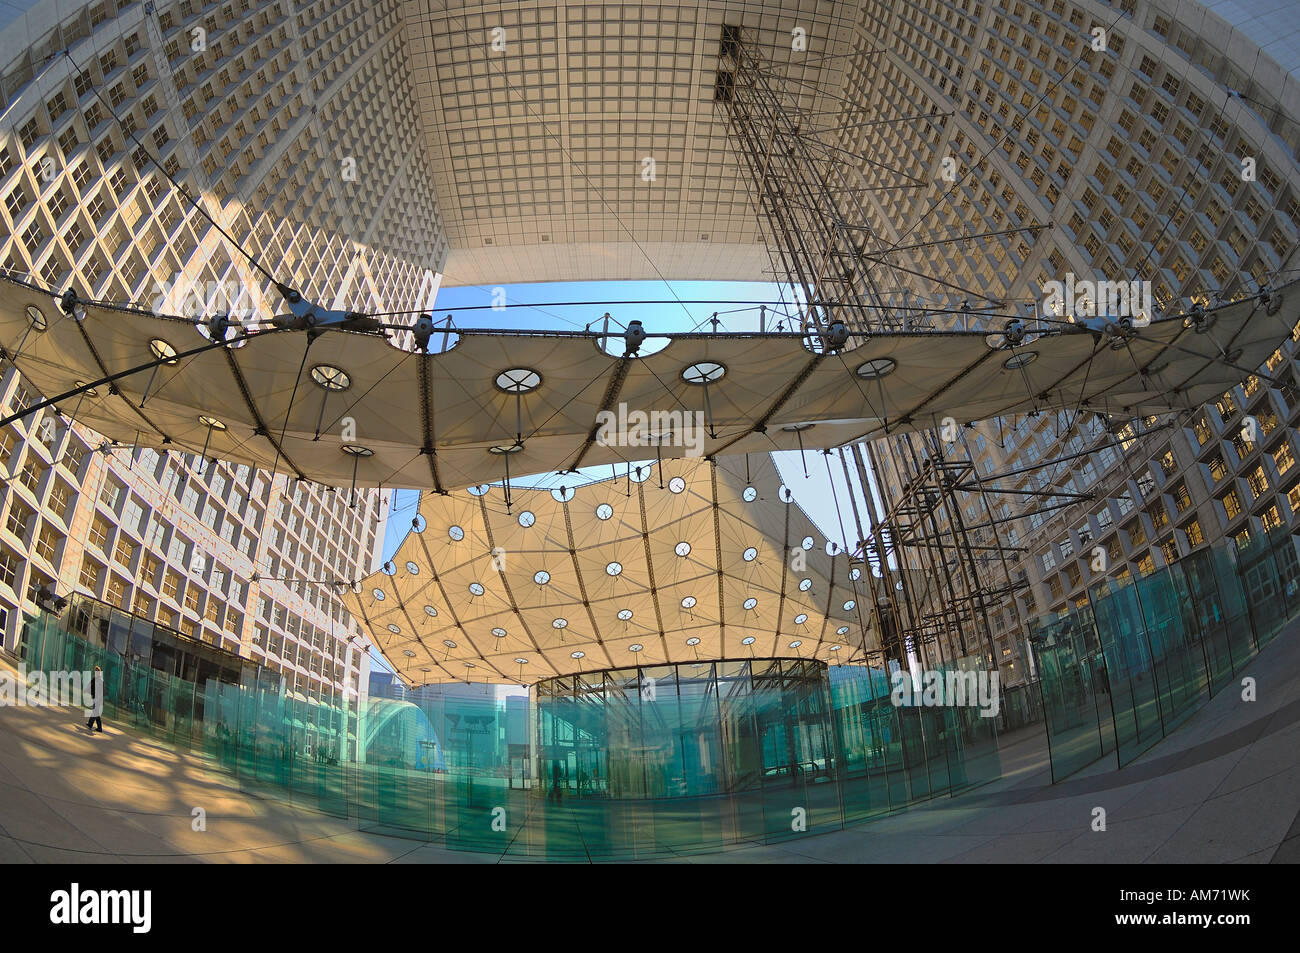 The Grande Arche at La Defense, seen from within the Arch, Paris Stock Photo